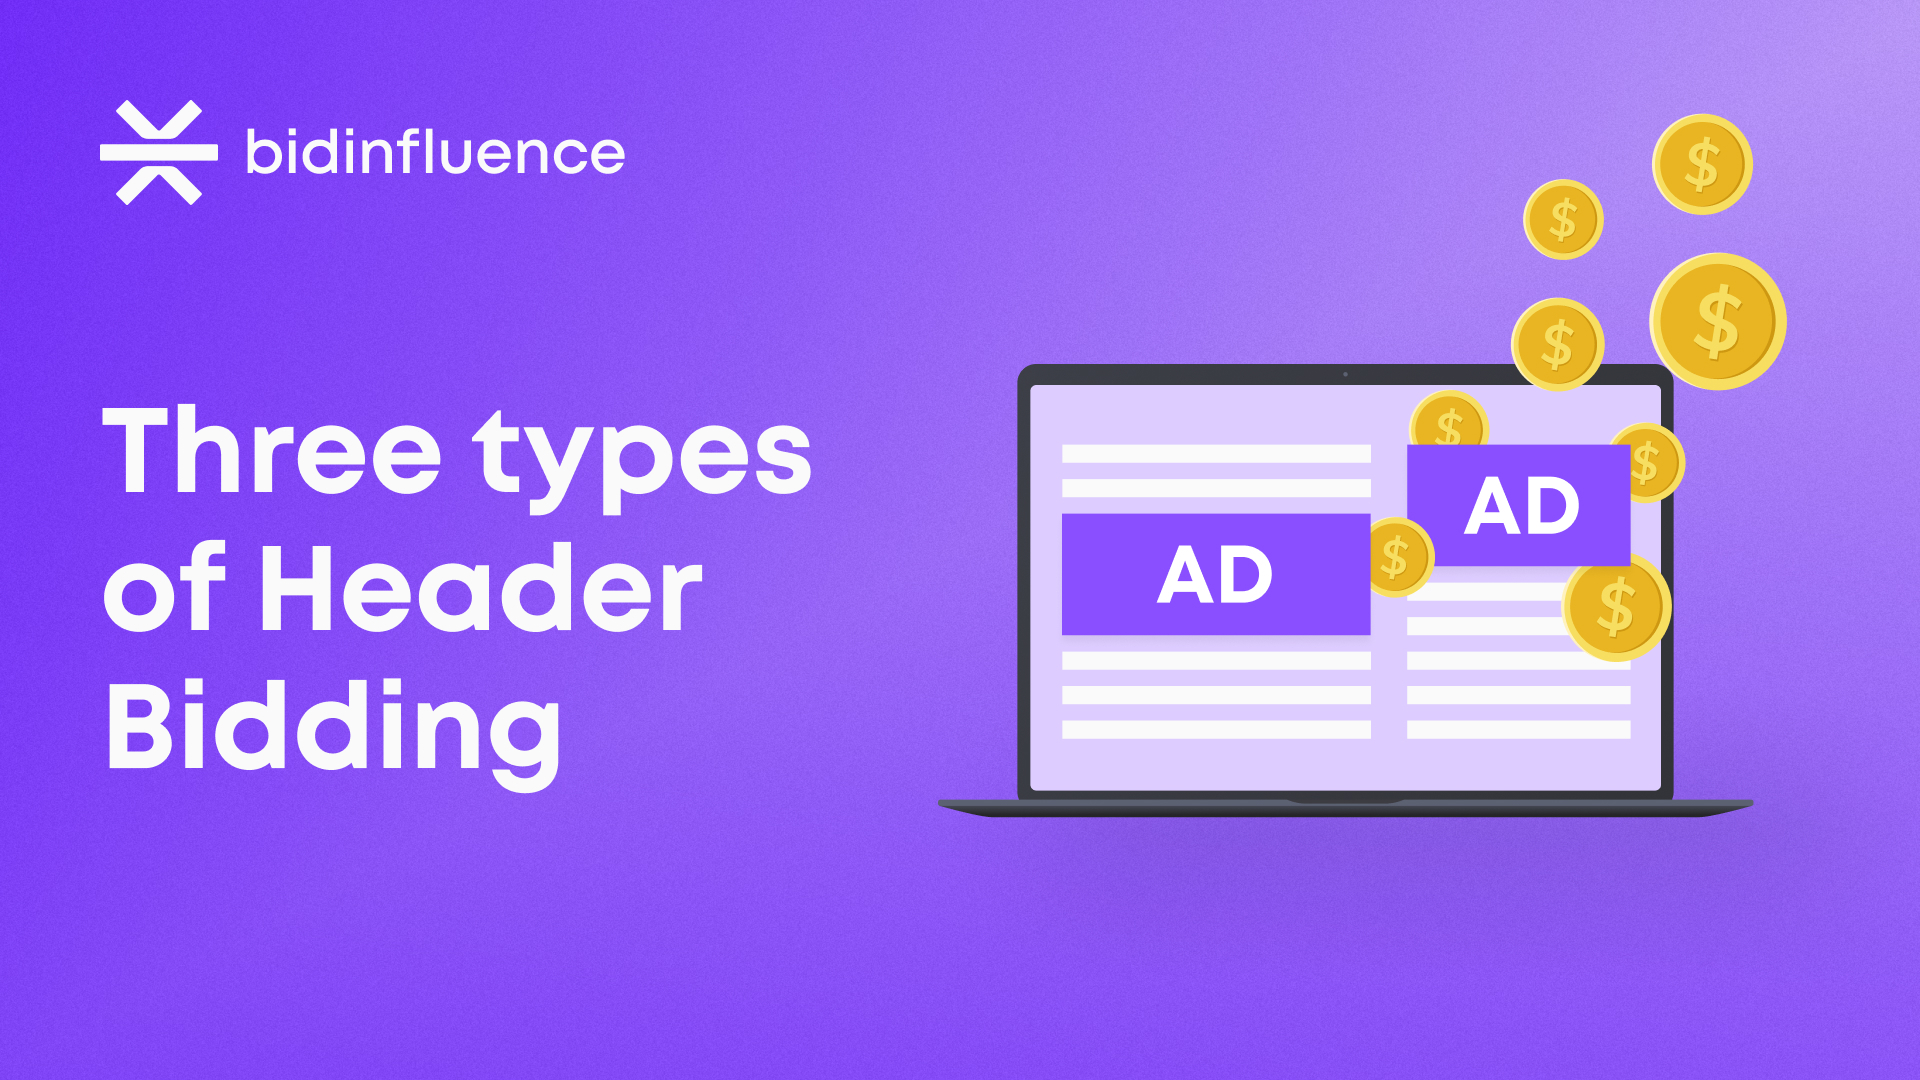 What are three types of Header Bidding